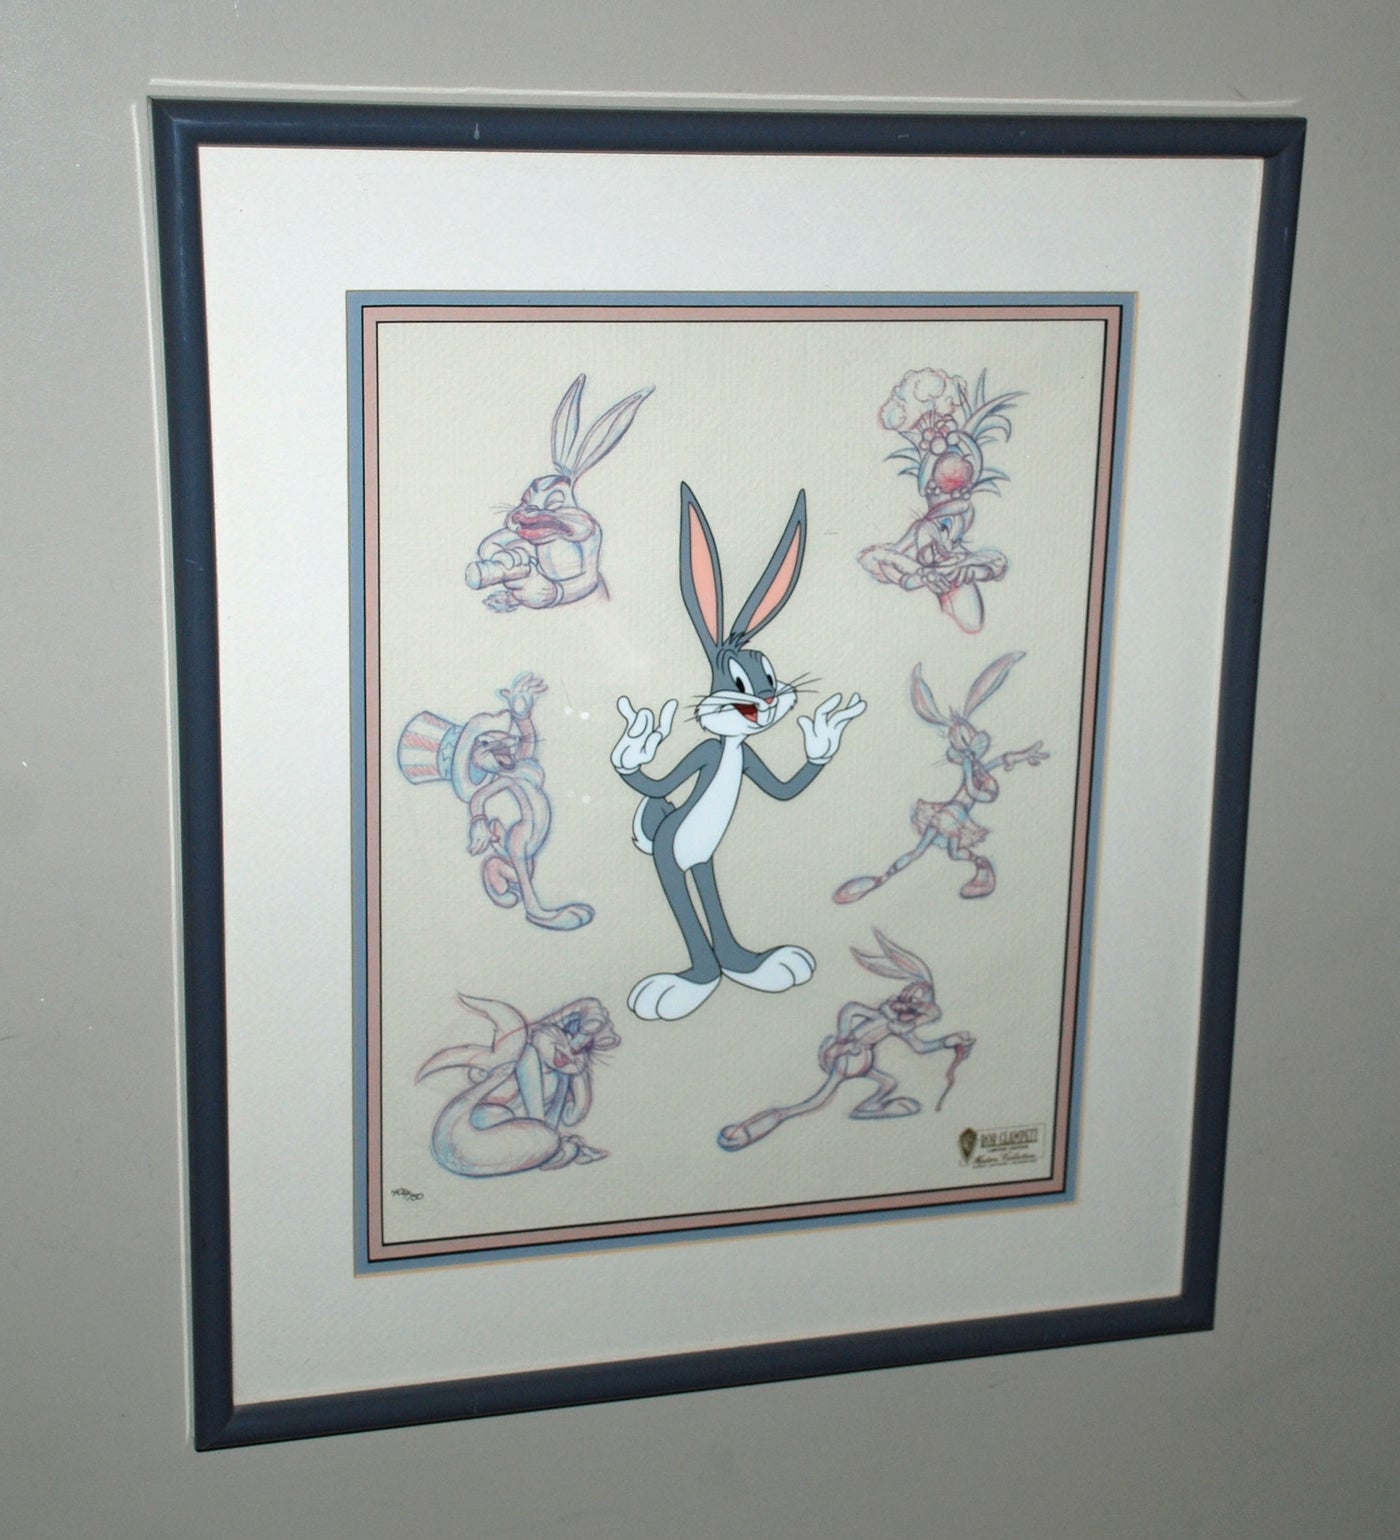 Original Warner Brothers Limited Edition Model Cel Featuring Bugs Bunny